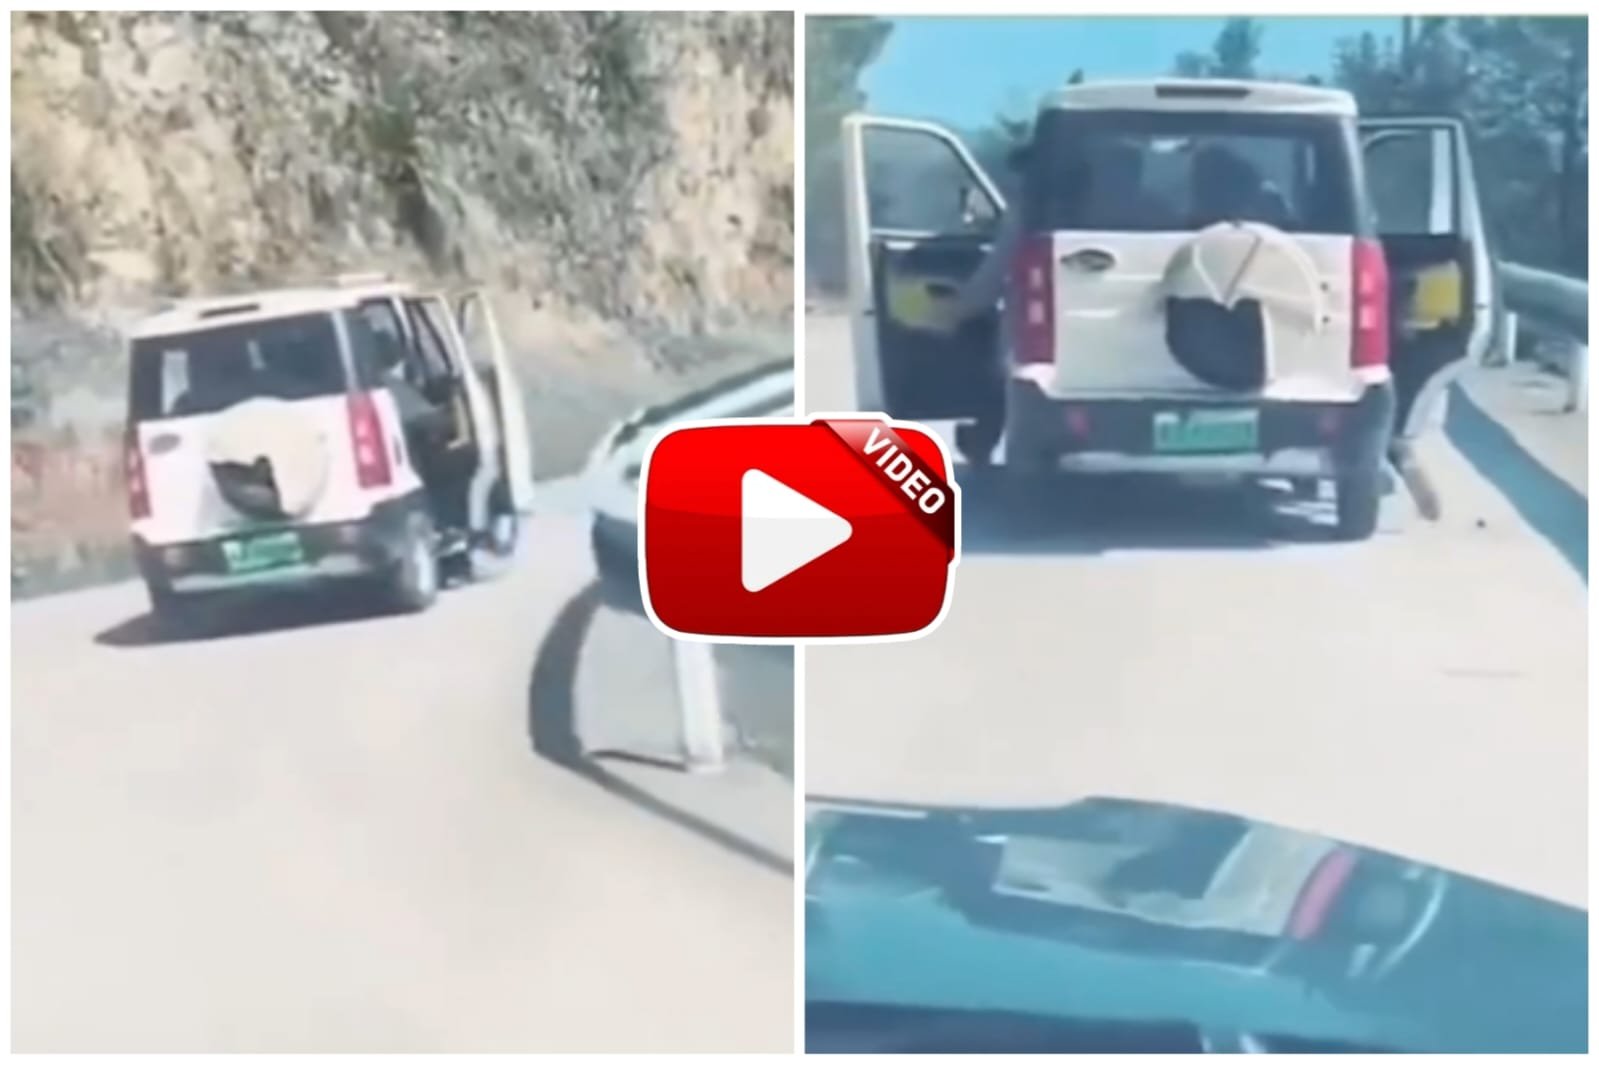 Car Video | People were seen driving the car by pushing with their feet.